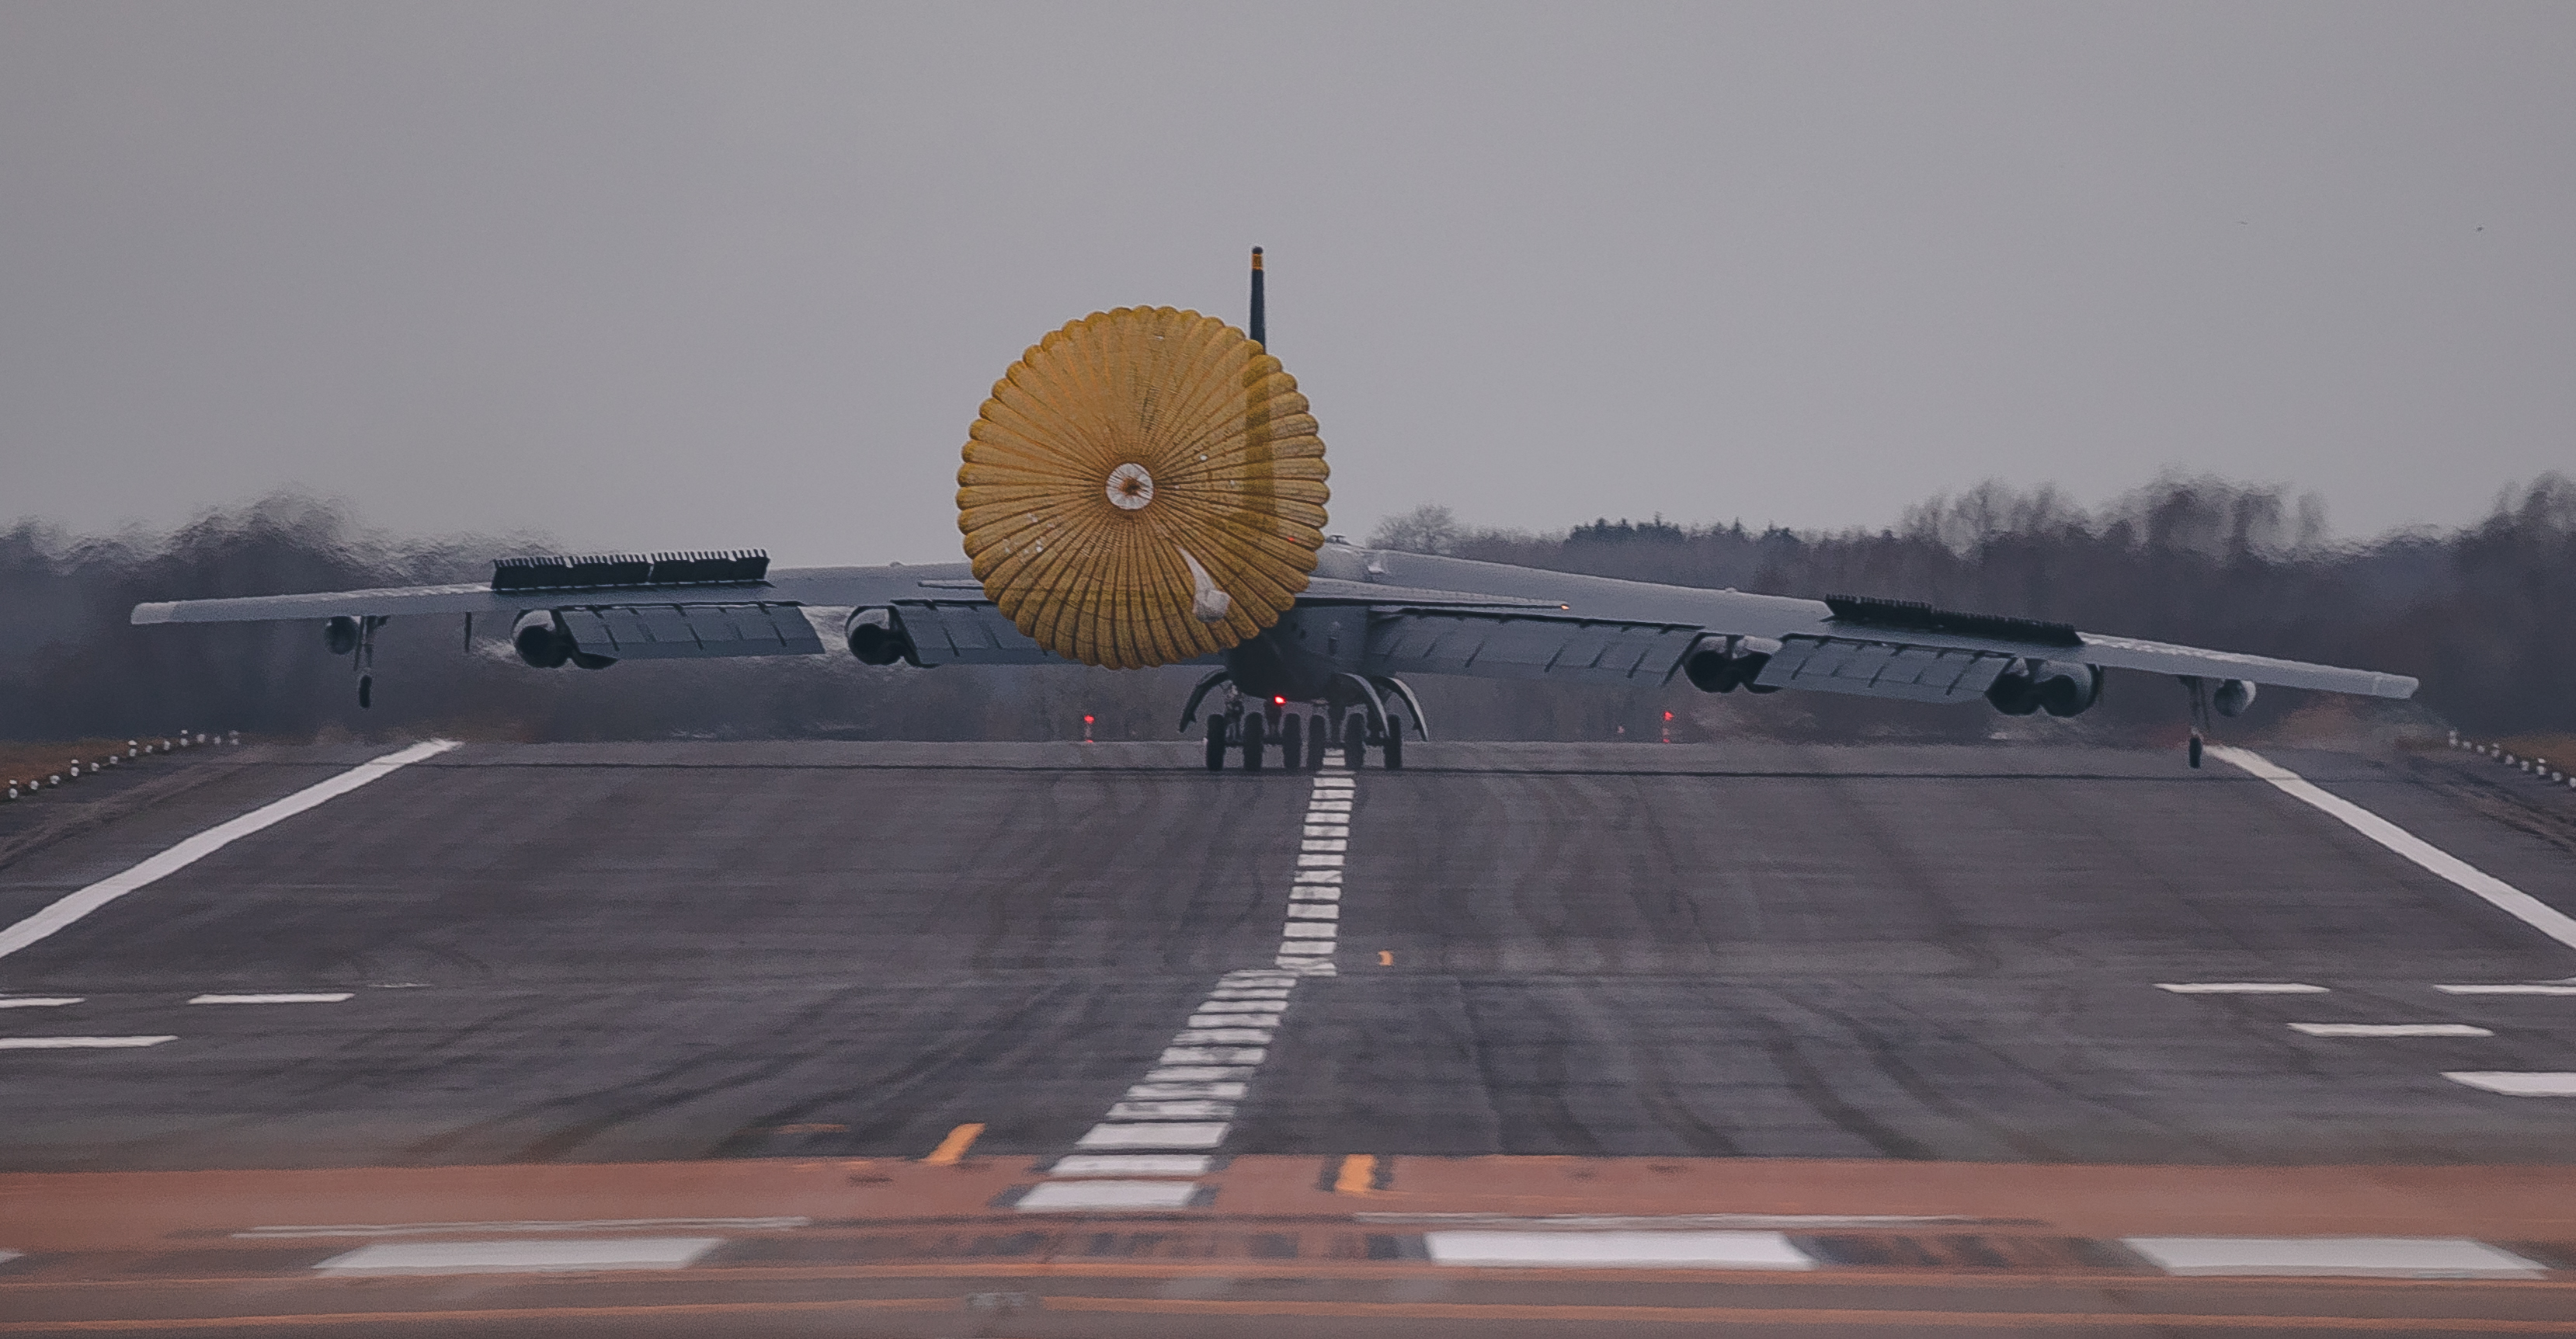 US B-52 on the runway with parachute to slow down.